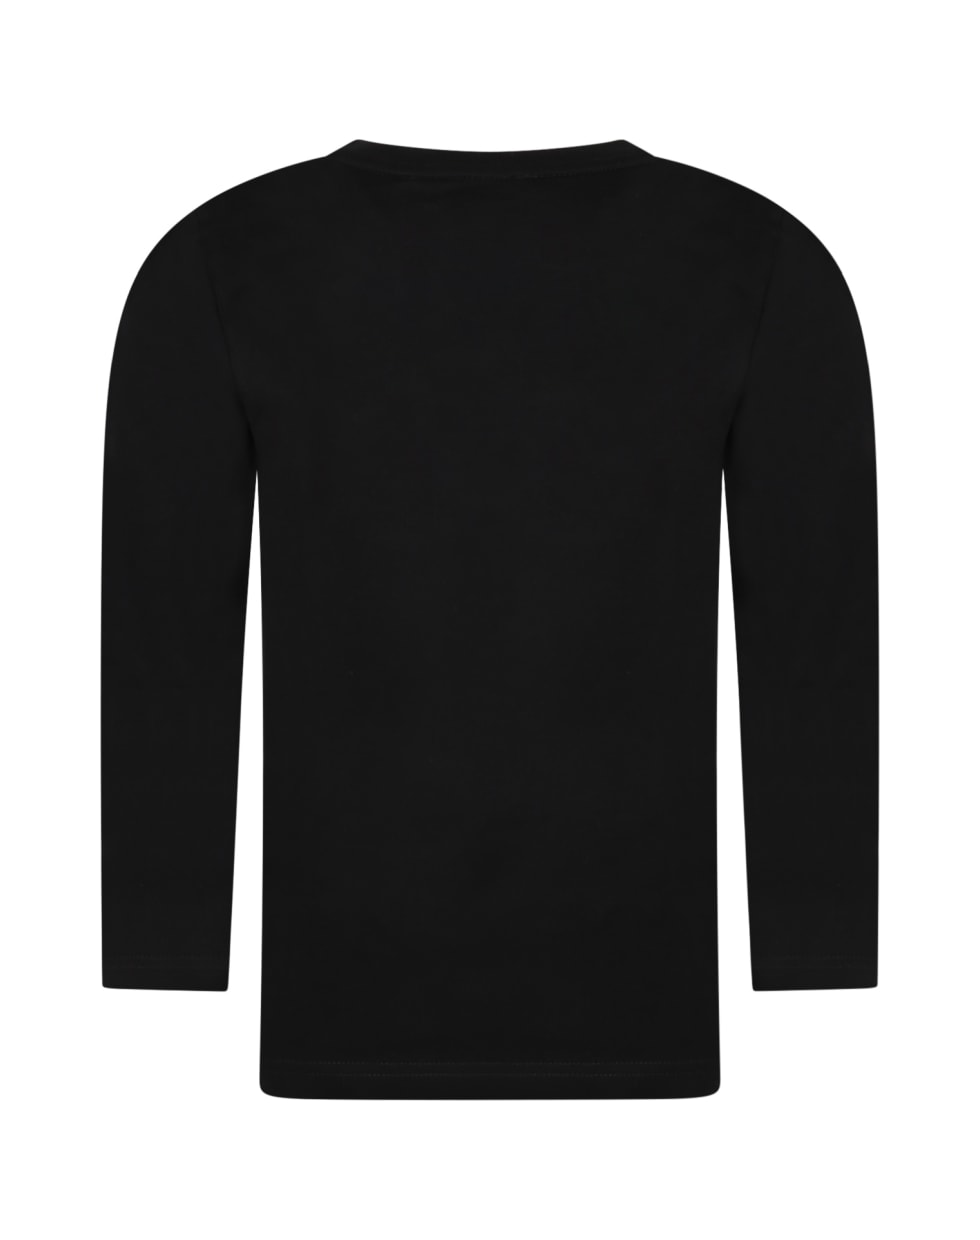 Givenchy Black T-shirt For Kids With White Logo - B Nero